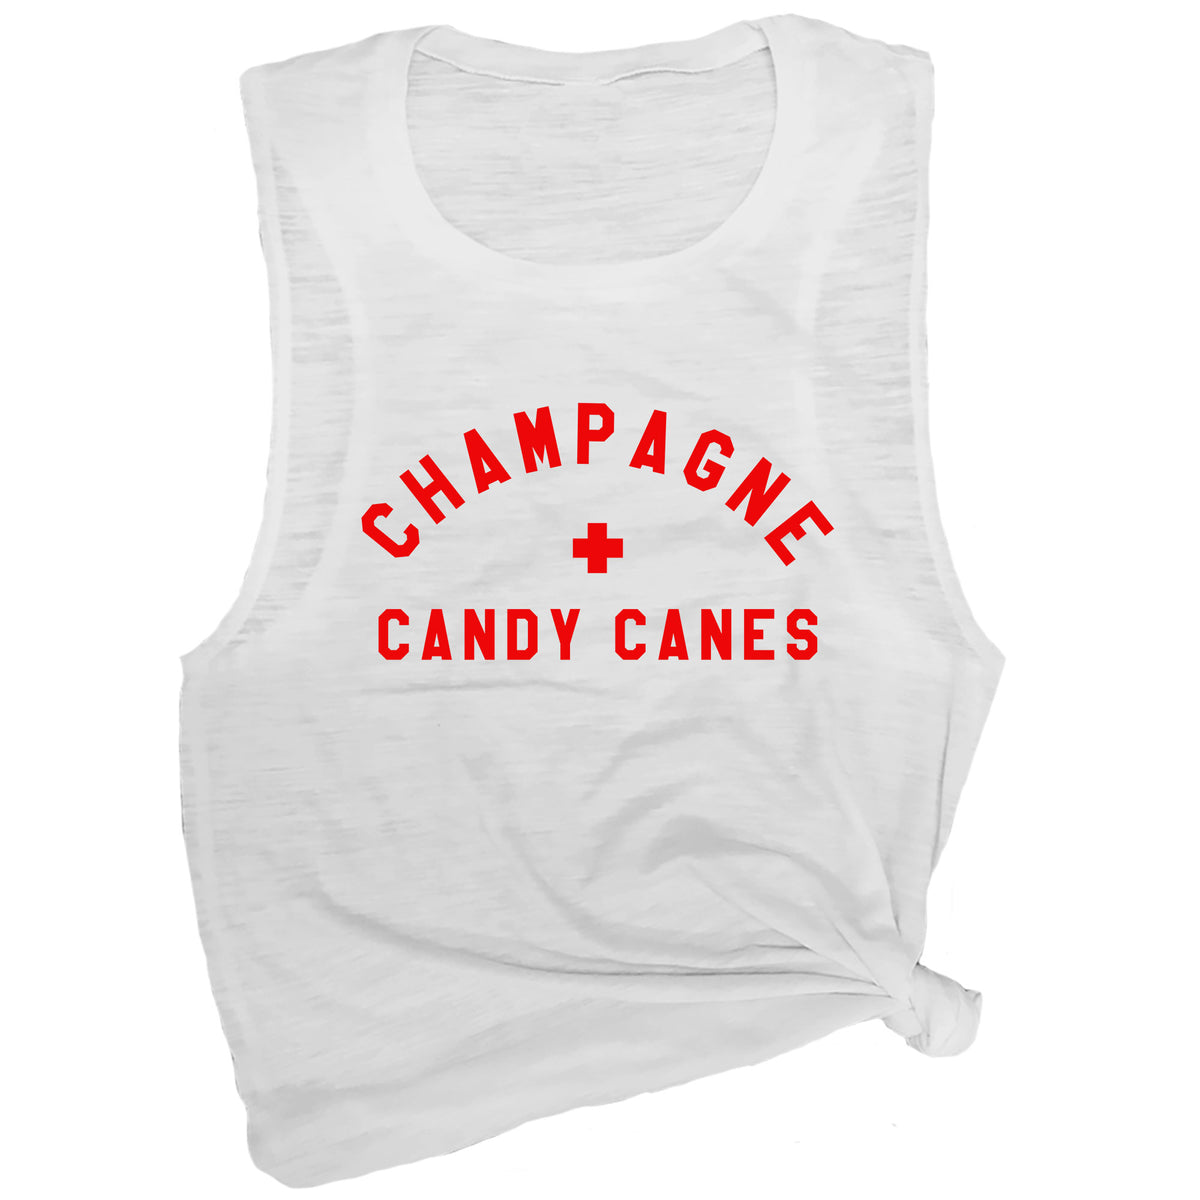 Champagne + Candy Canes Muscle Tee